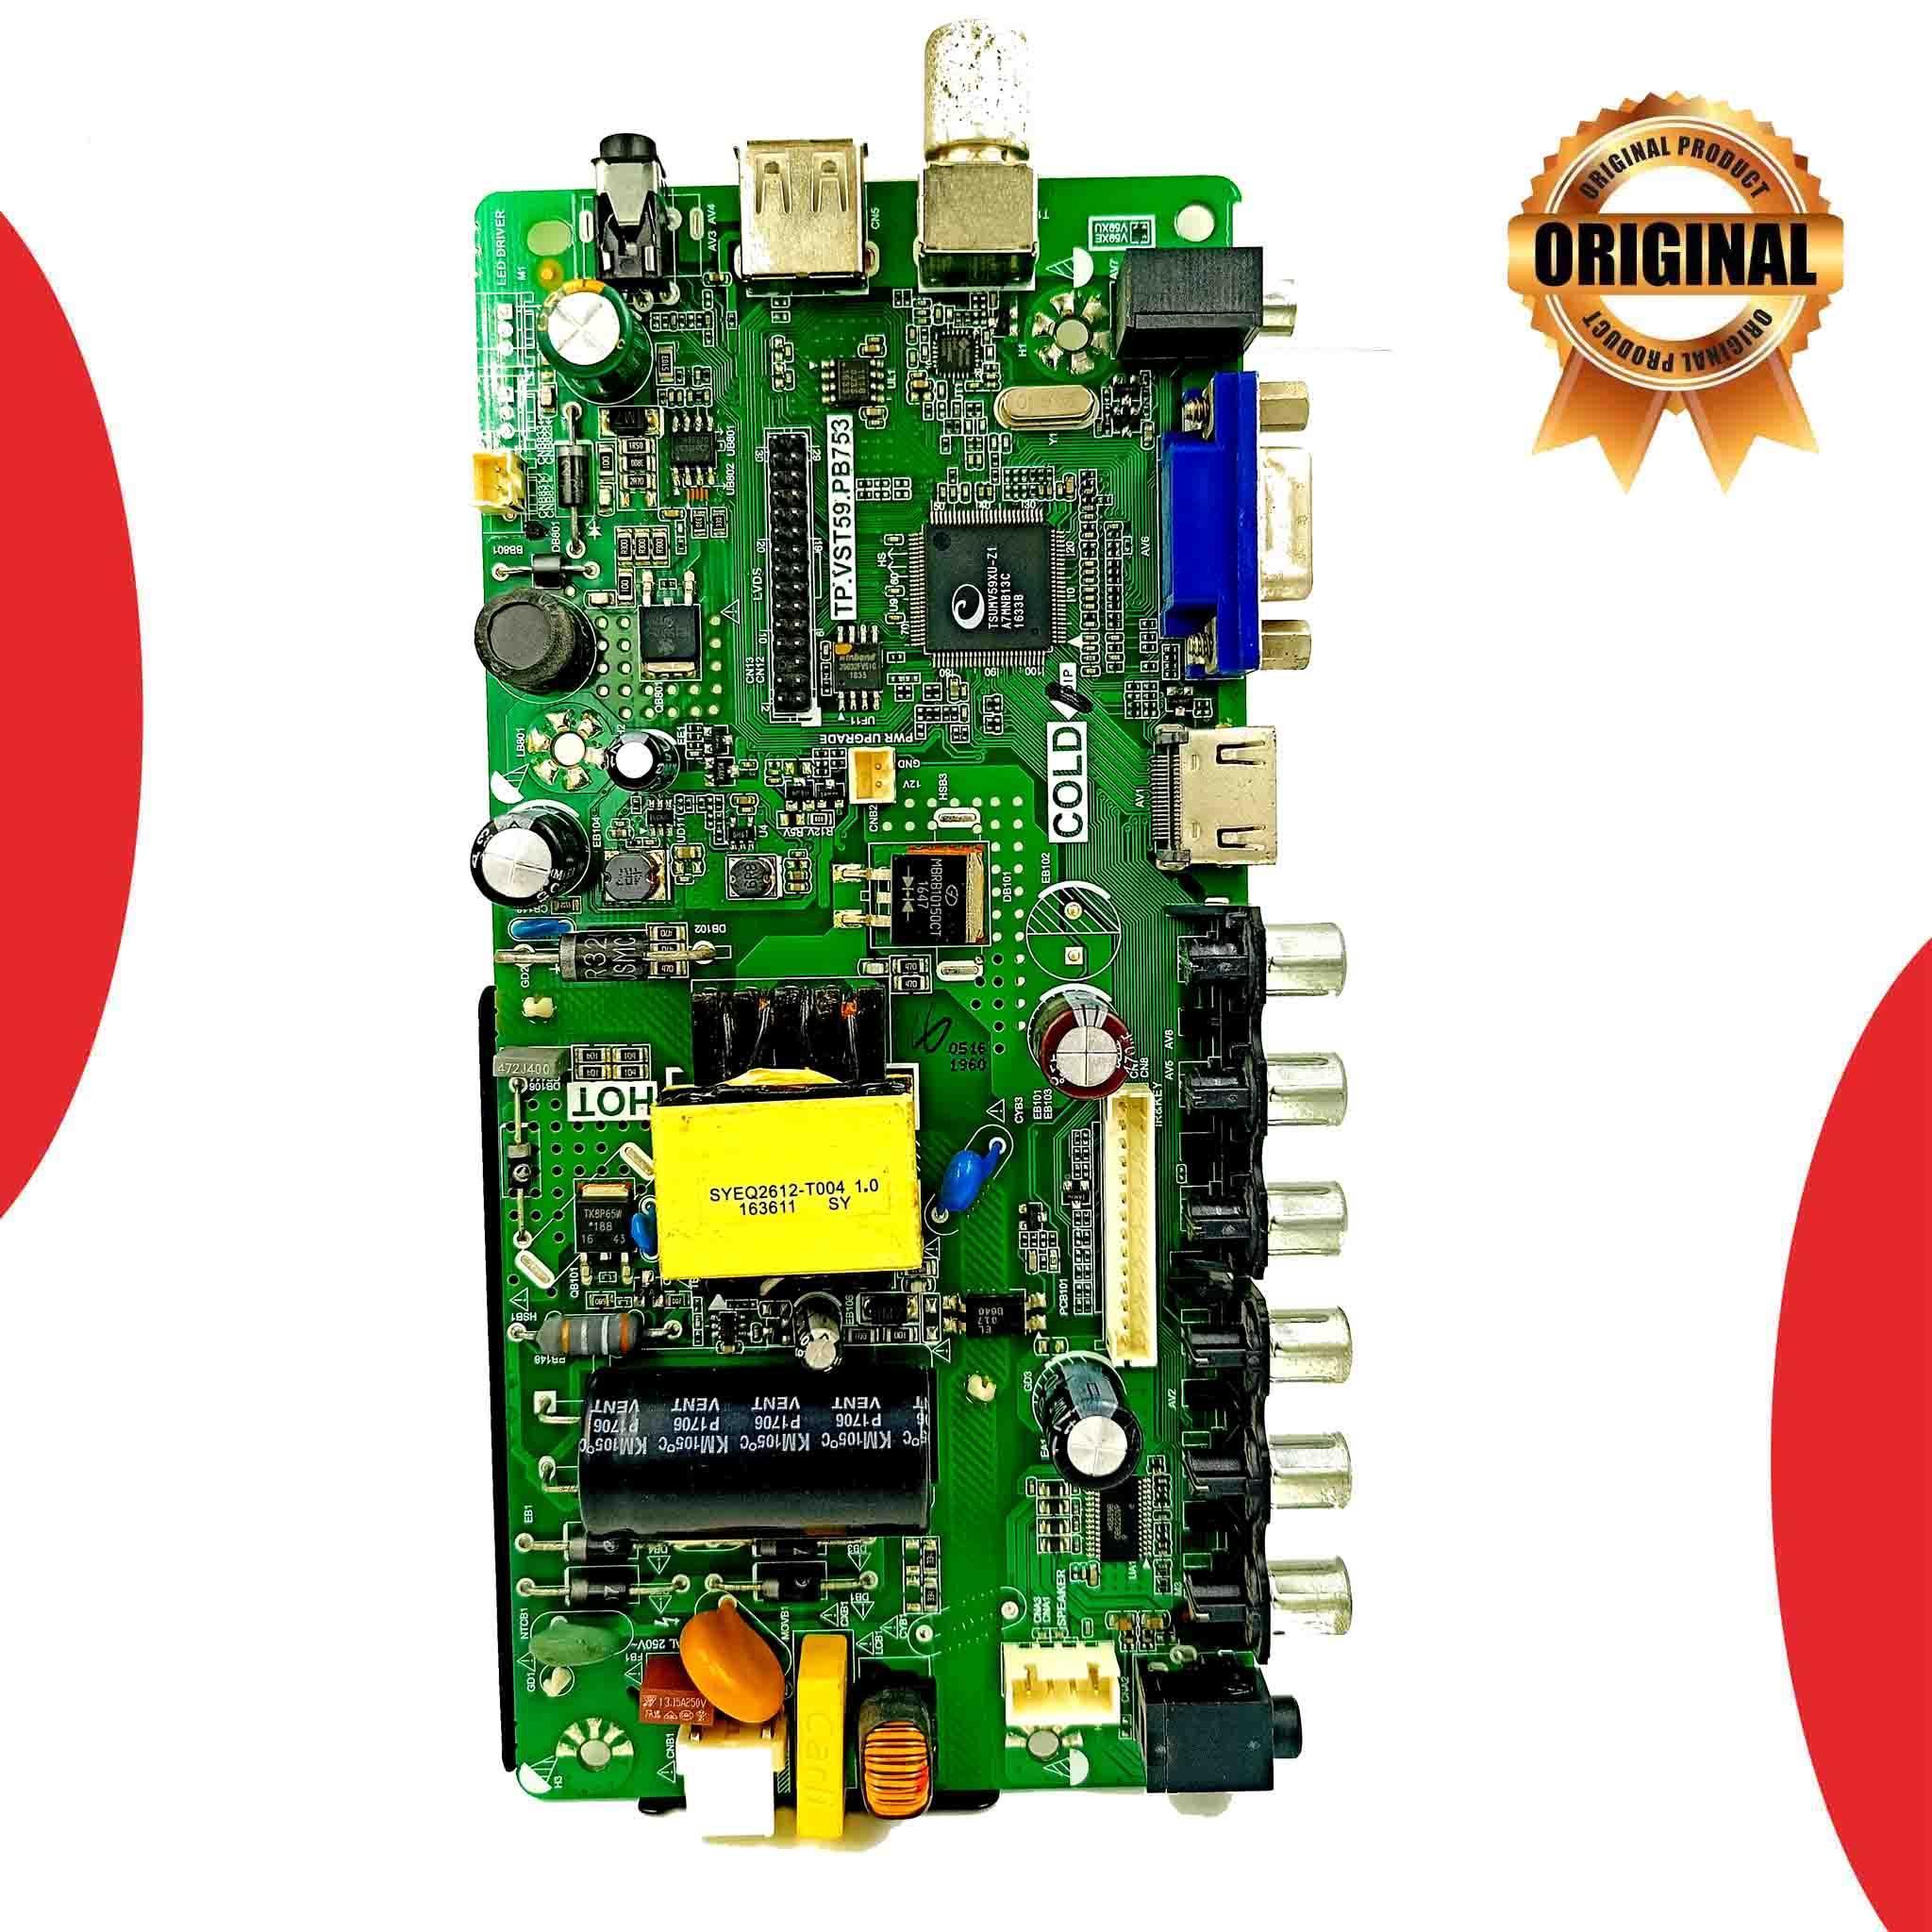 Intex 22 inch LED TV Motherboard for Model 2208FHD - Great Bharat Electronics